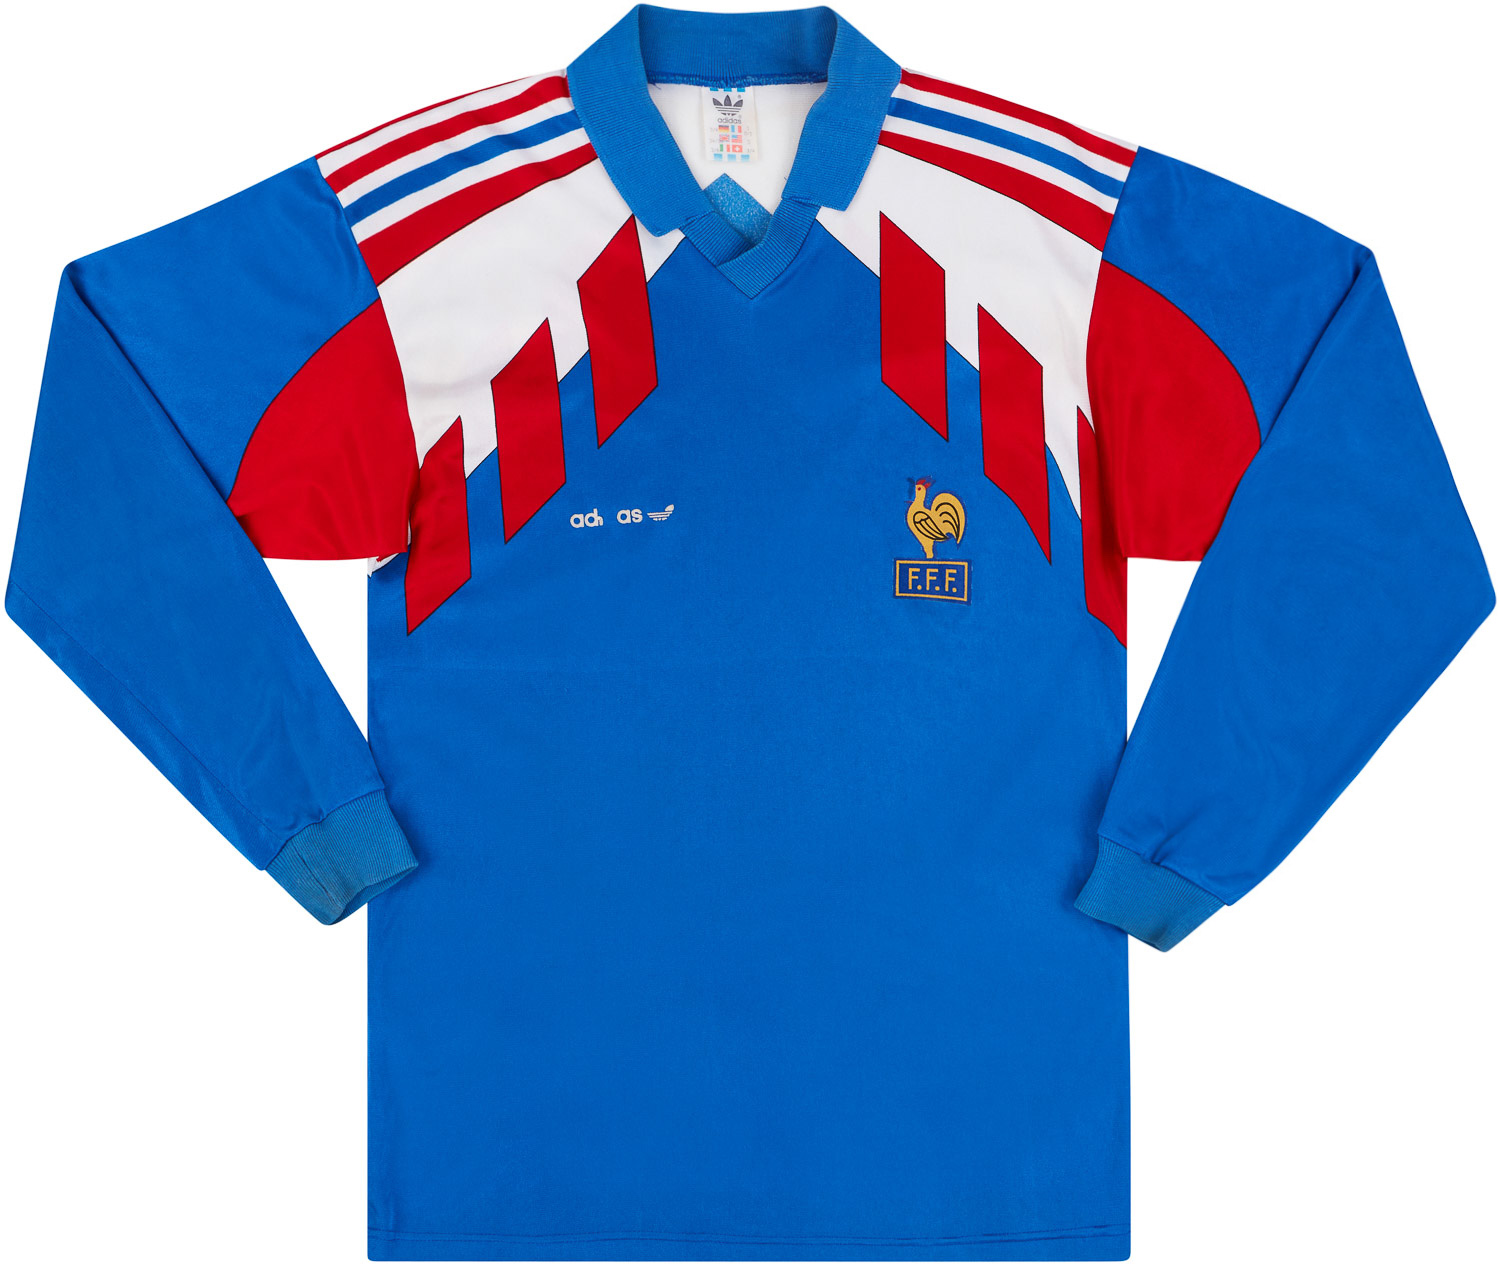 1990-92 France Player Issue Home Shirt - 5/10 - ()